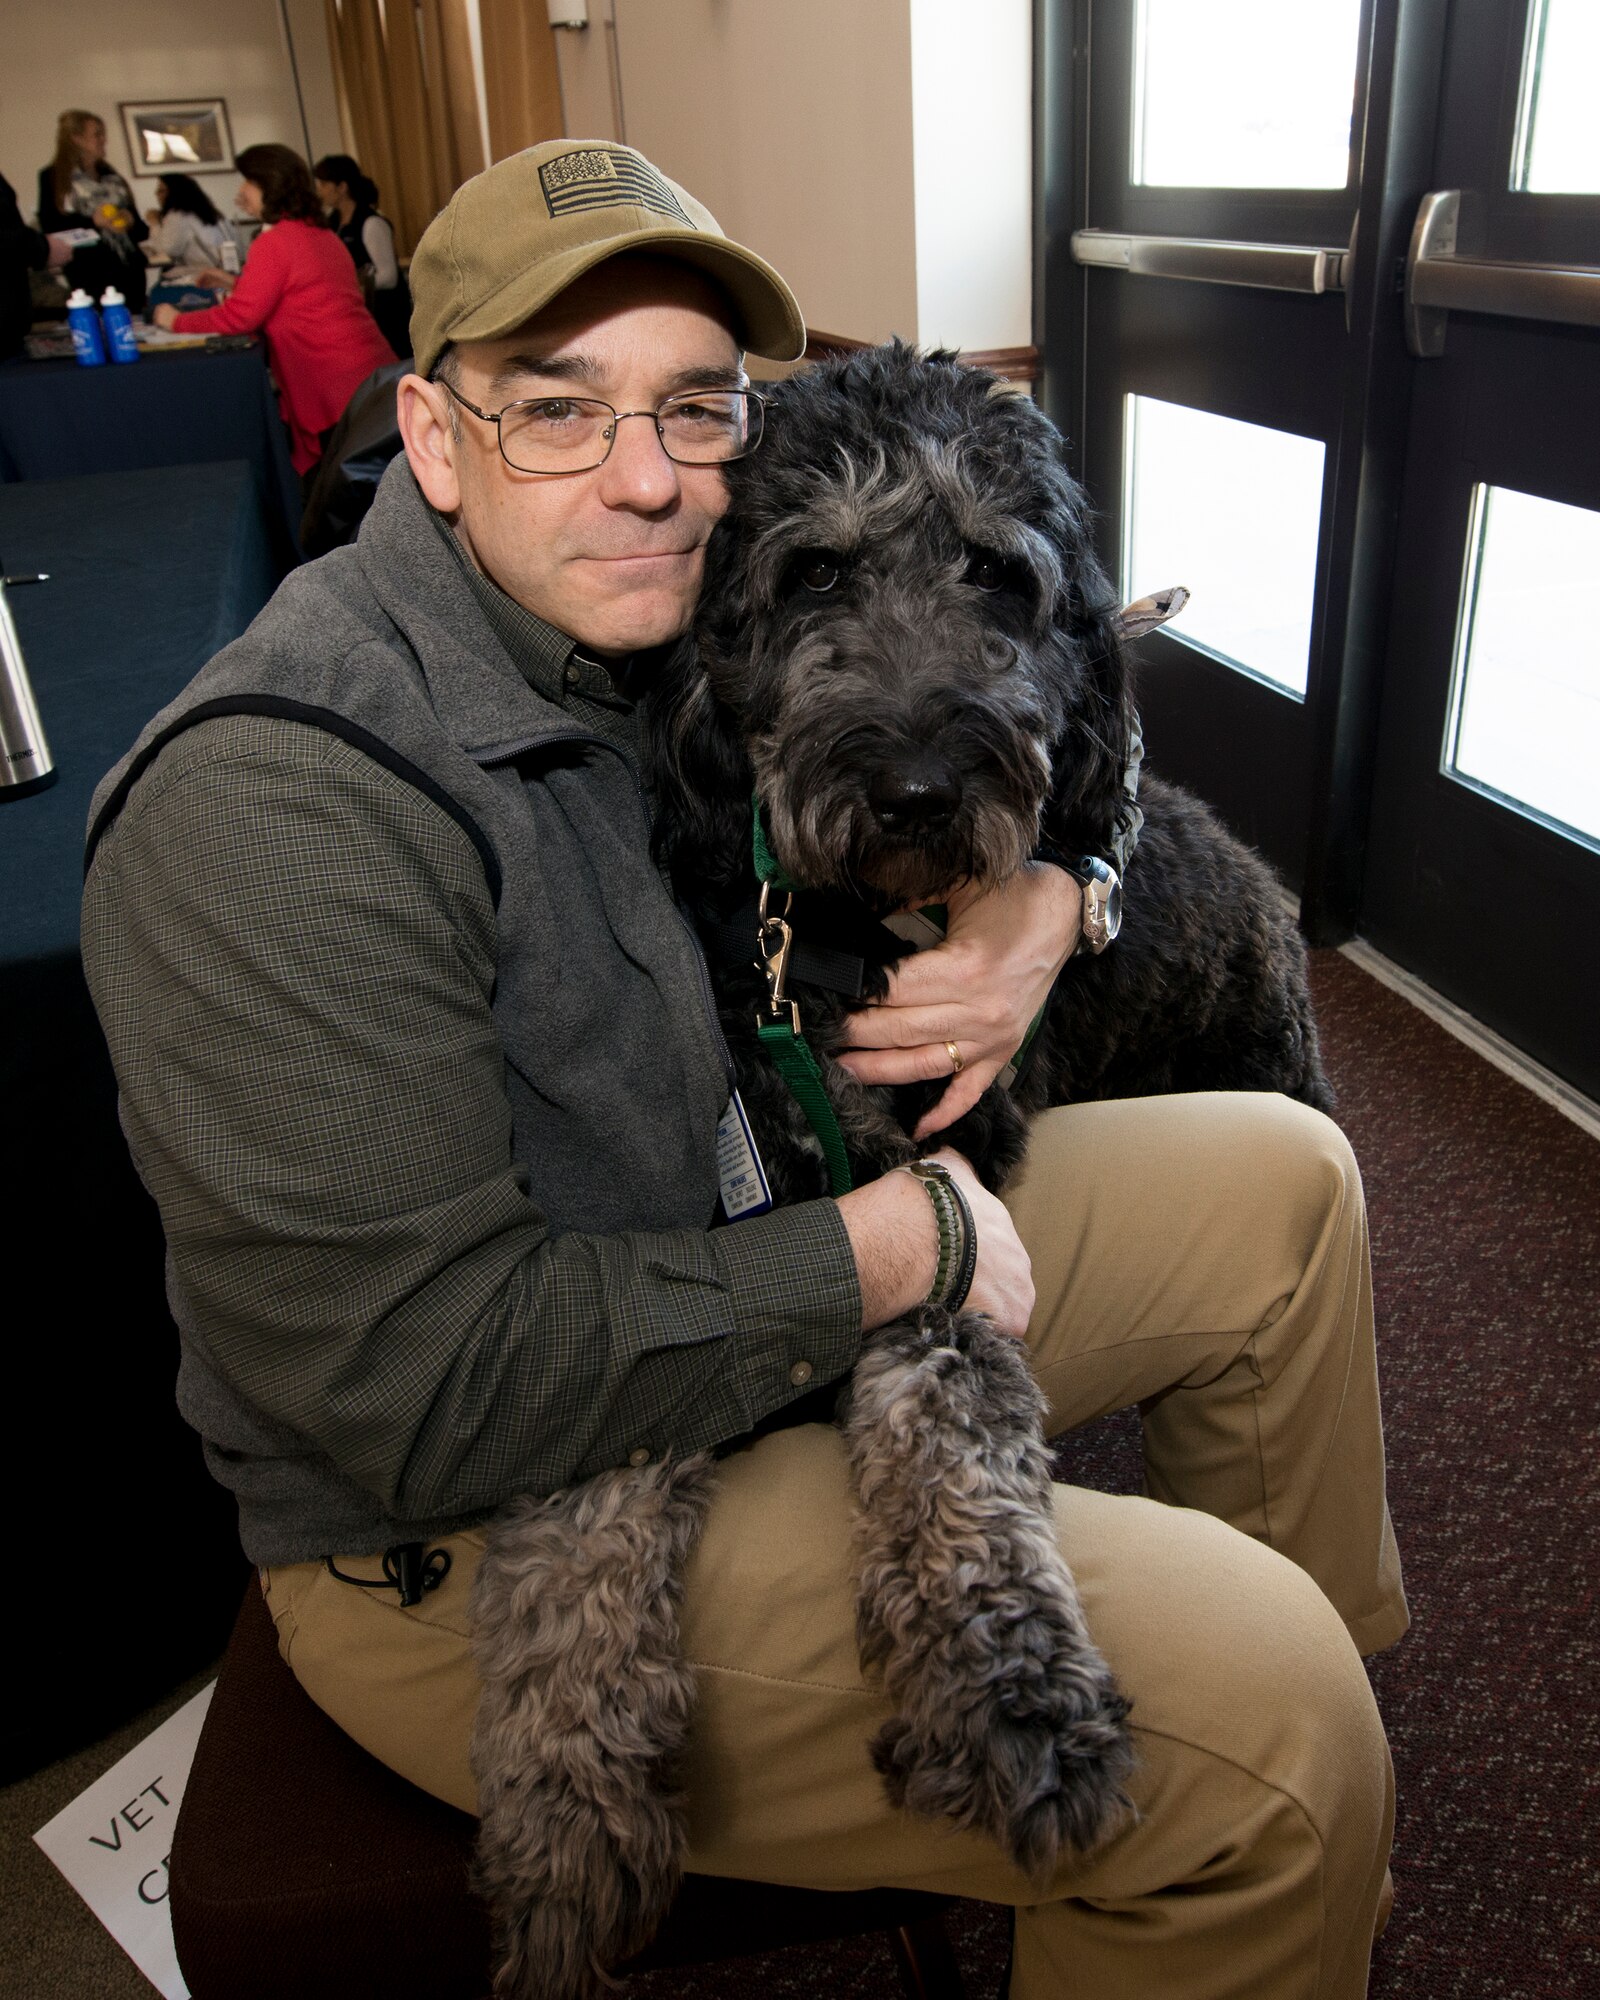 Mr. James Becker, Buffalo Vet Center Outreach Counselor and Service Dog Jazzy represent the Buffalo Vet Center table at the Wellness Seminar being held at the Niagara Falls Air Reserve Station, January 15, 2014, Niagara Falls NY. Over twenty vendors participated in this one day seminar hosted by the base that offered chair massages, bone density screening, nutrition info, smoking cessation, financial wellness, animal therapy and more. (U.S. Air Force photo by Tech. Sgt. Joseph McKee)